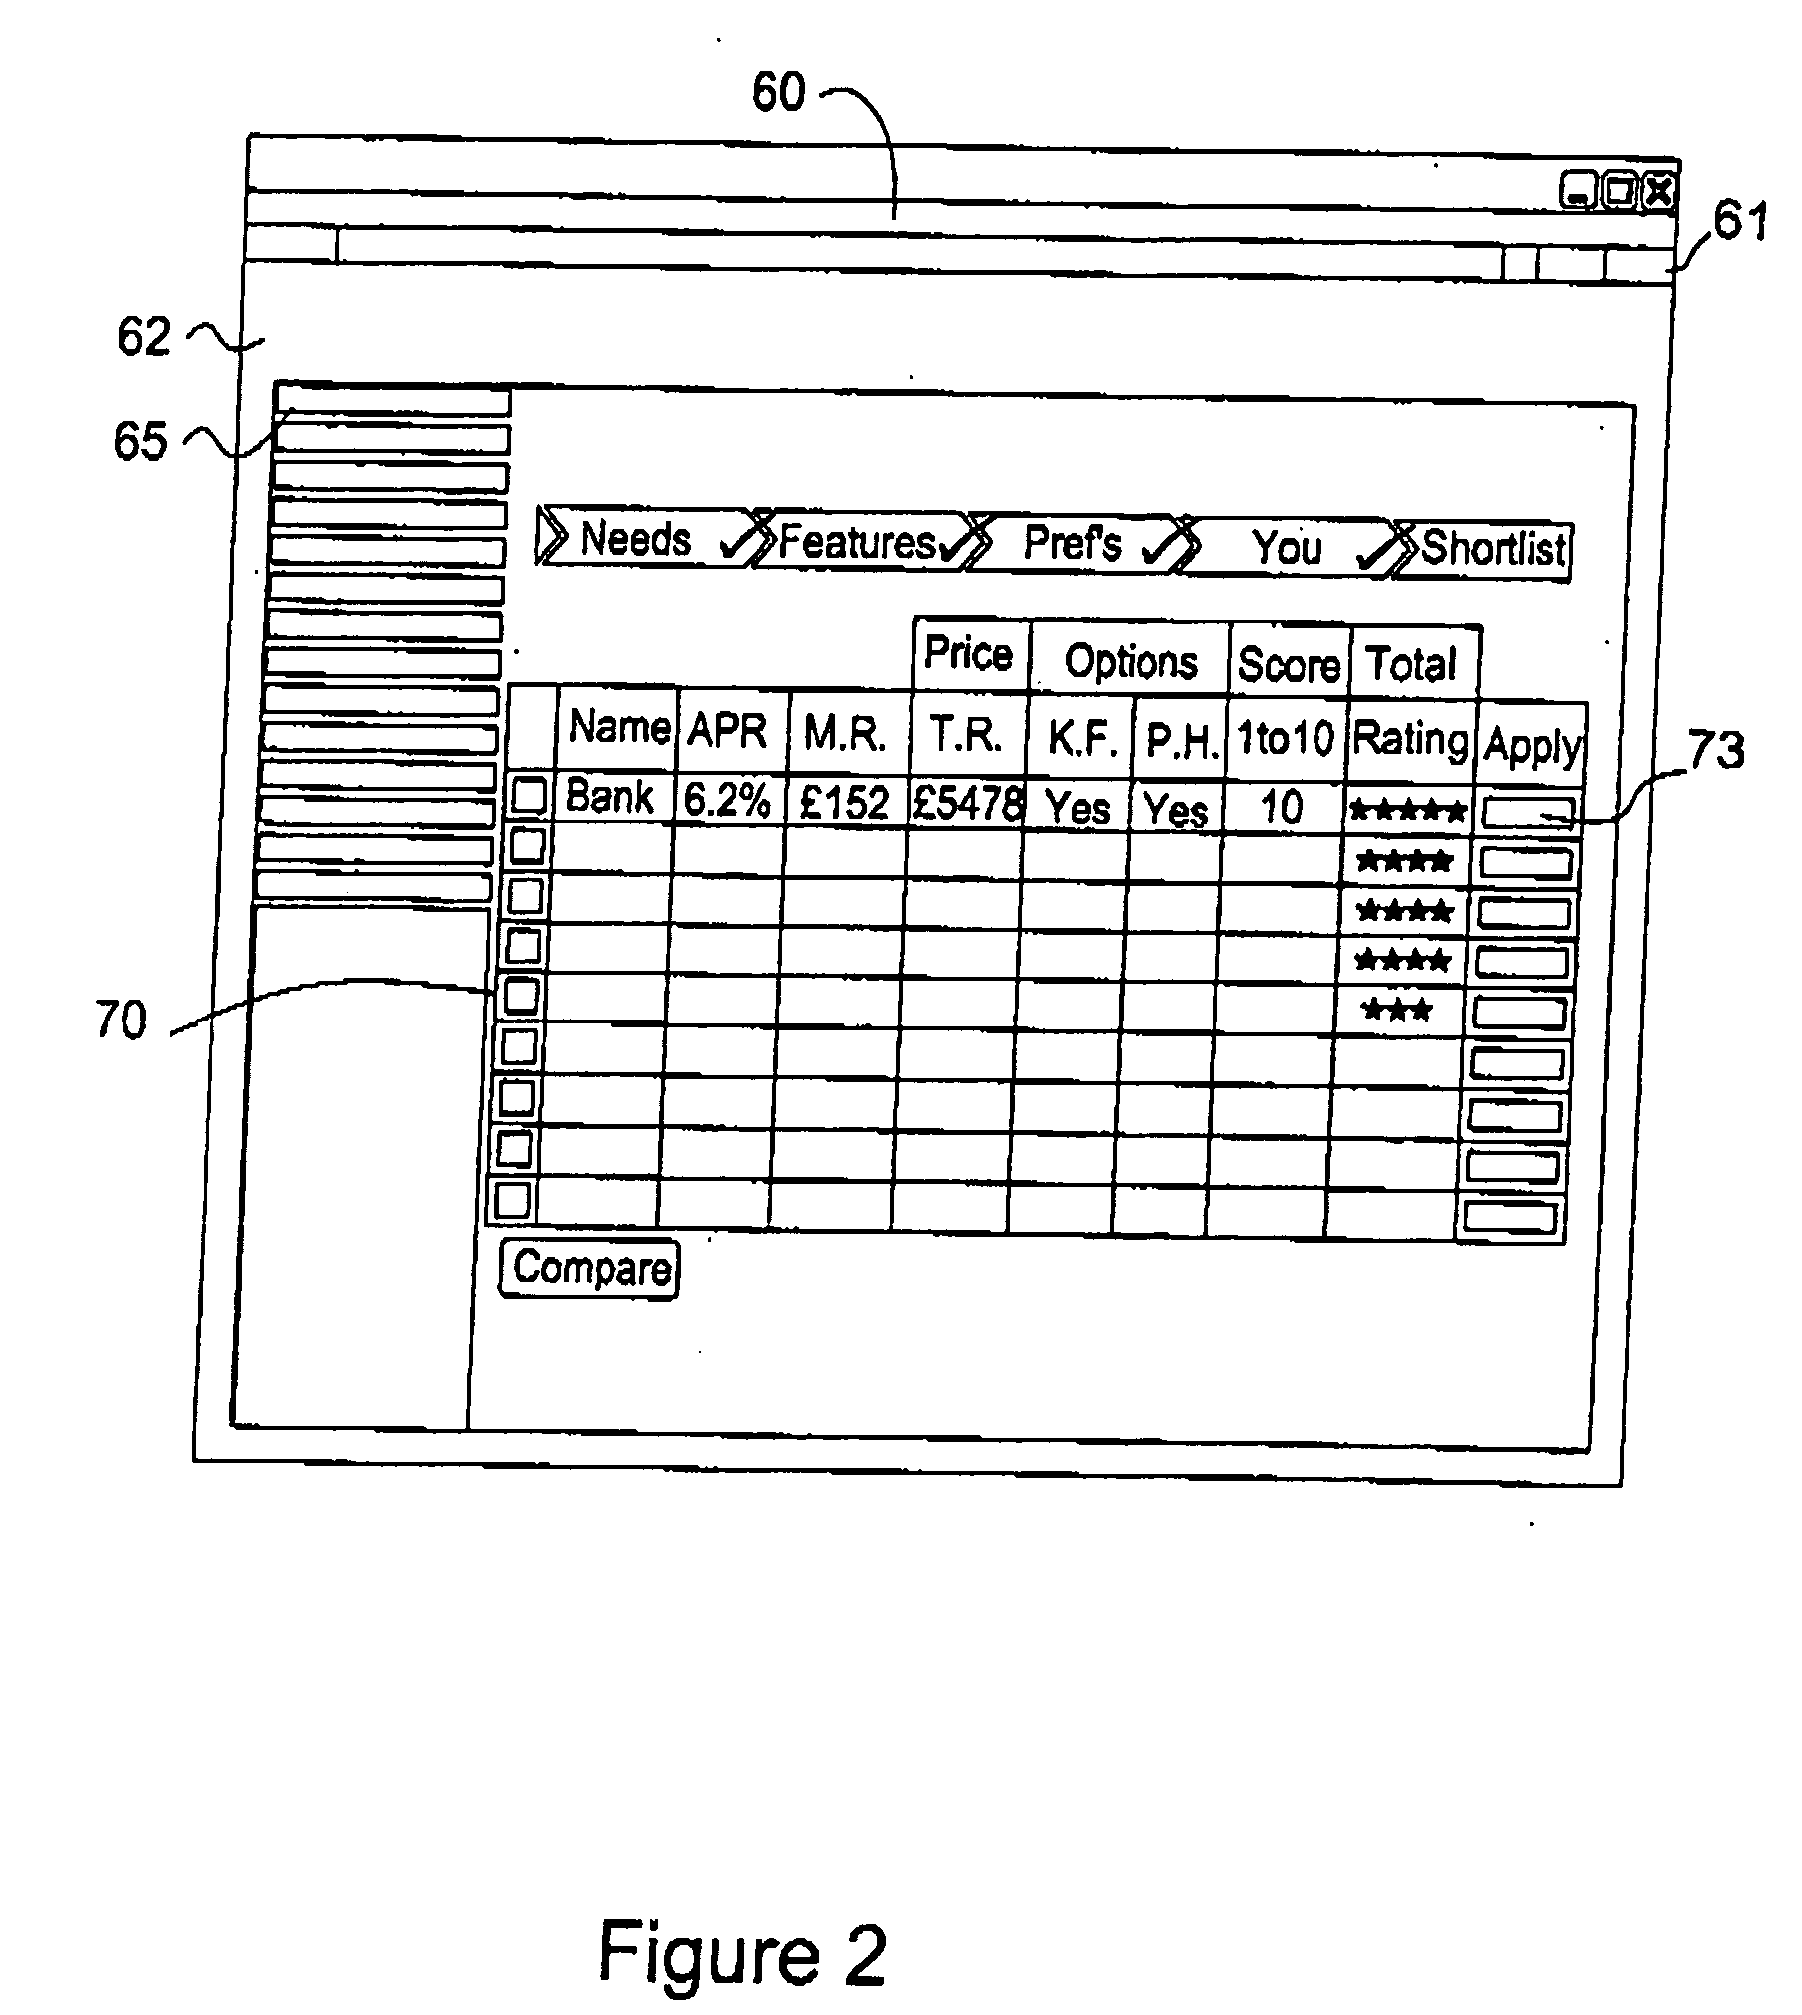 Information system with propensity modelling and profiling engine